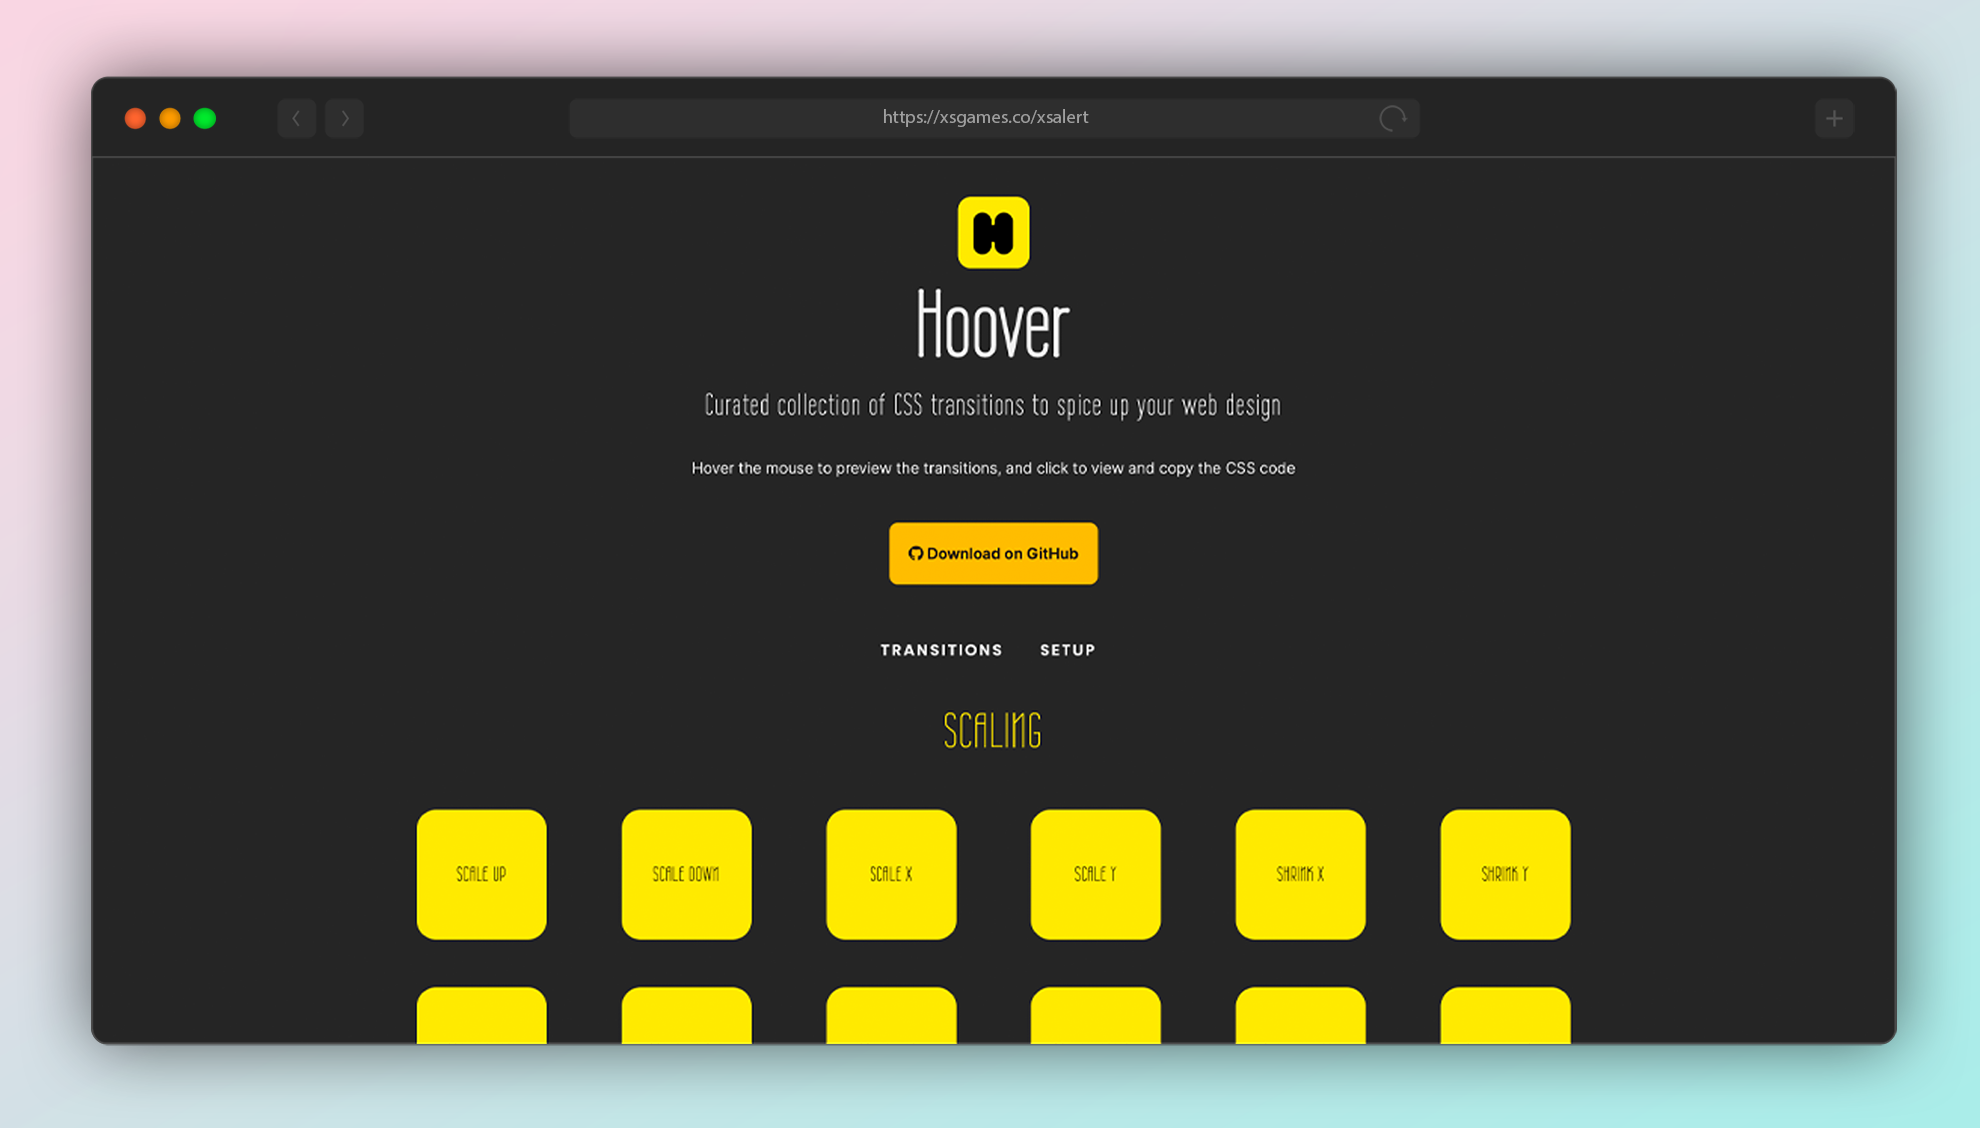 Hoover - Curated collection of CSS transitions to spice up your web design